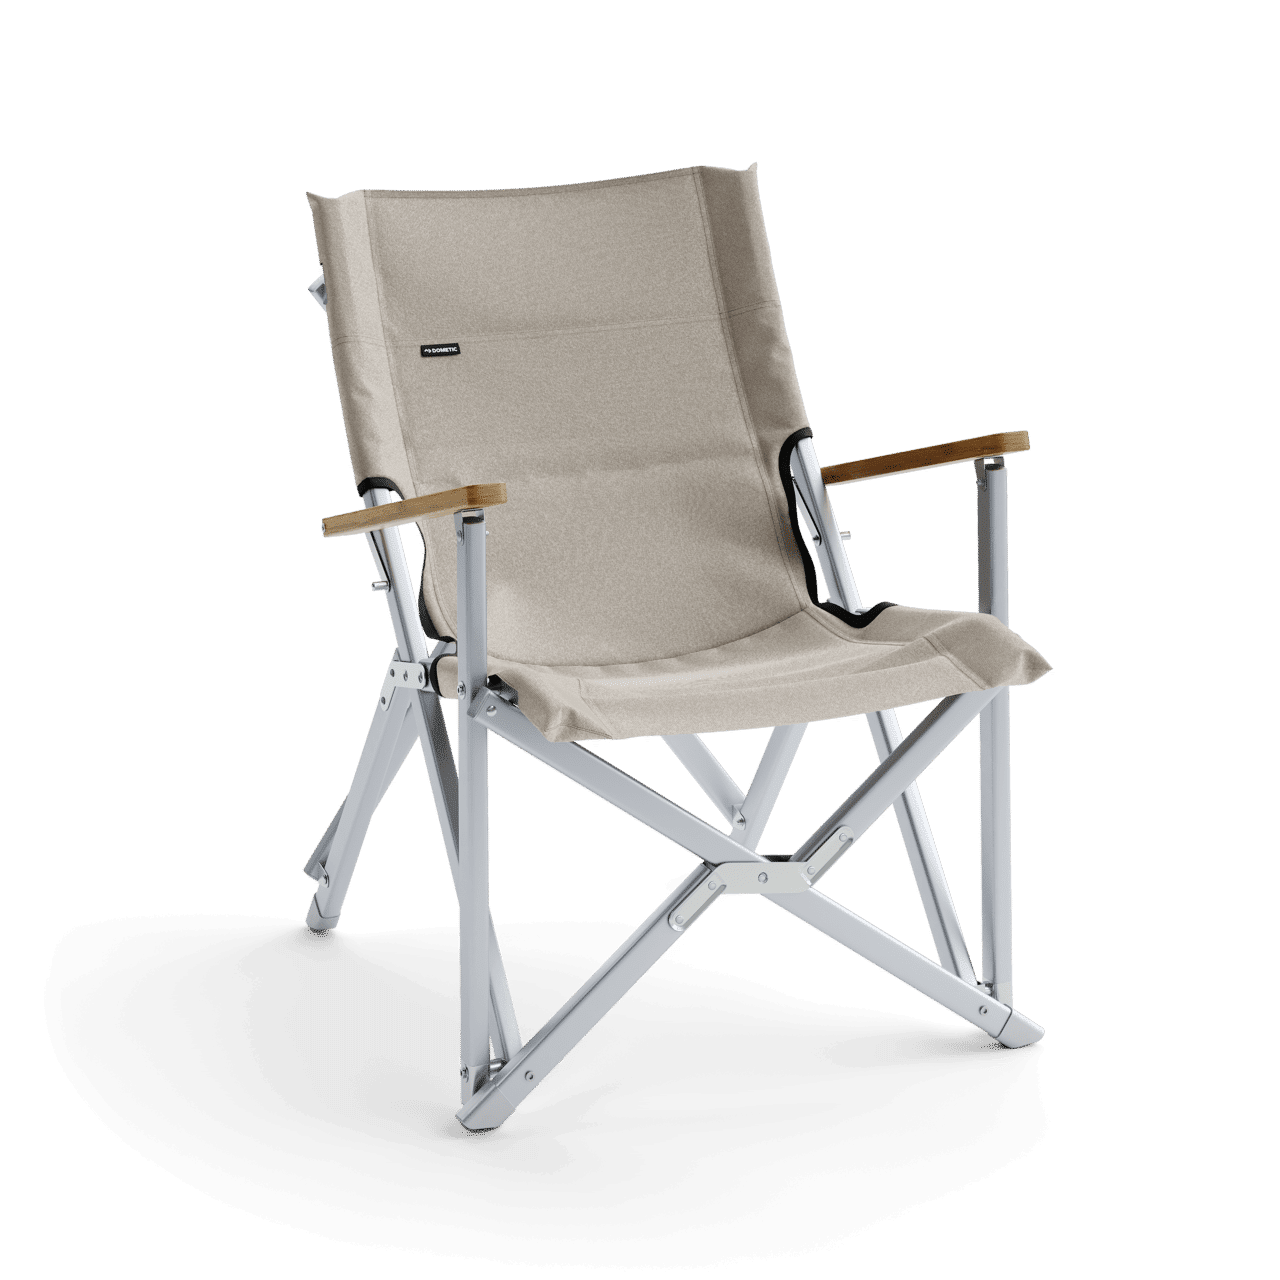 Dometic Compact Camp Chair - Campingstol | Hardloop